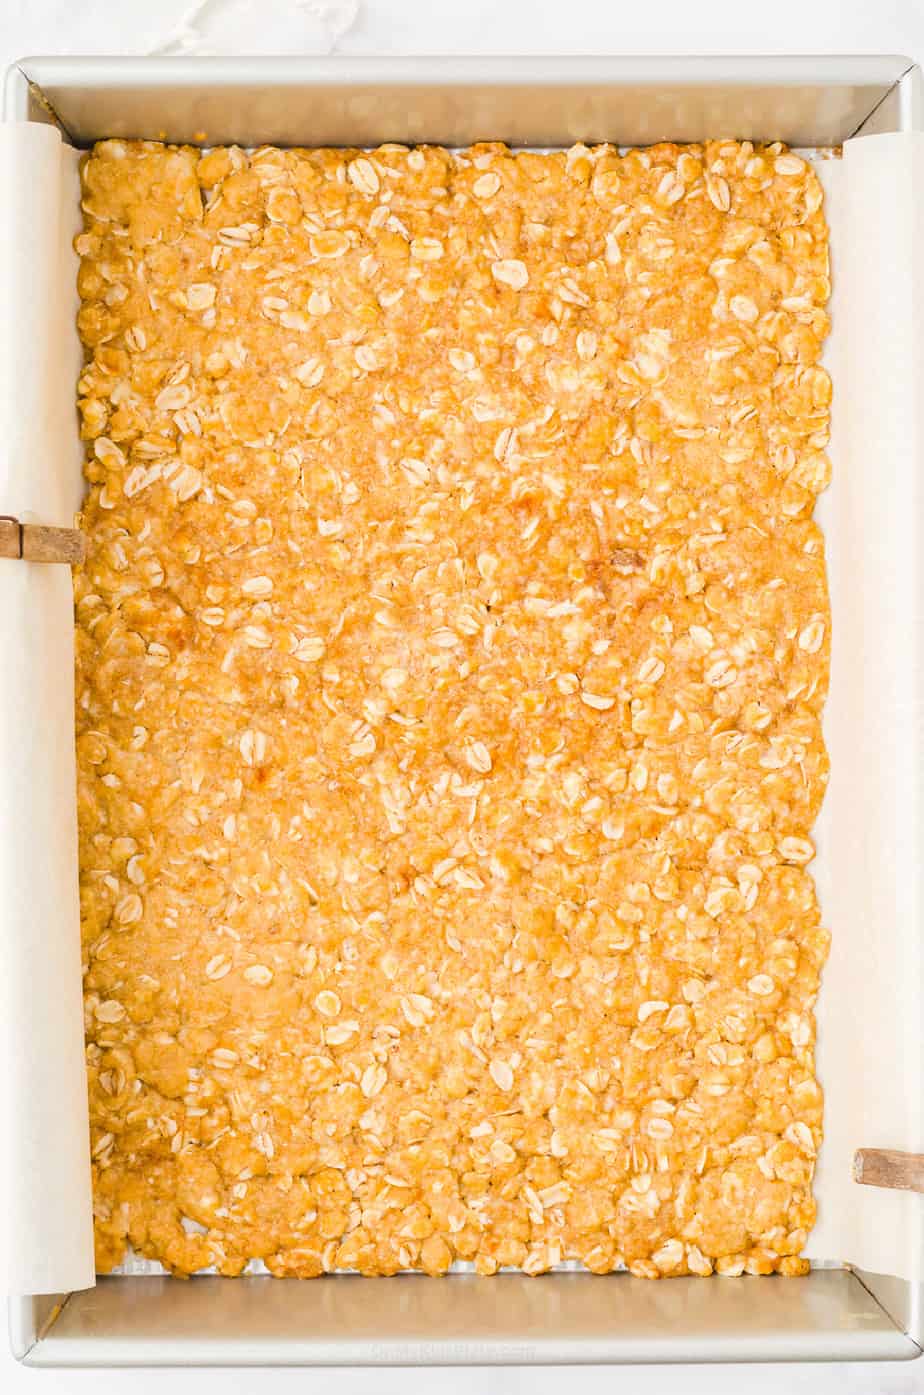 Oat layer pressed into a pan and baked